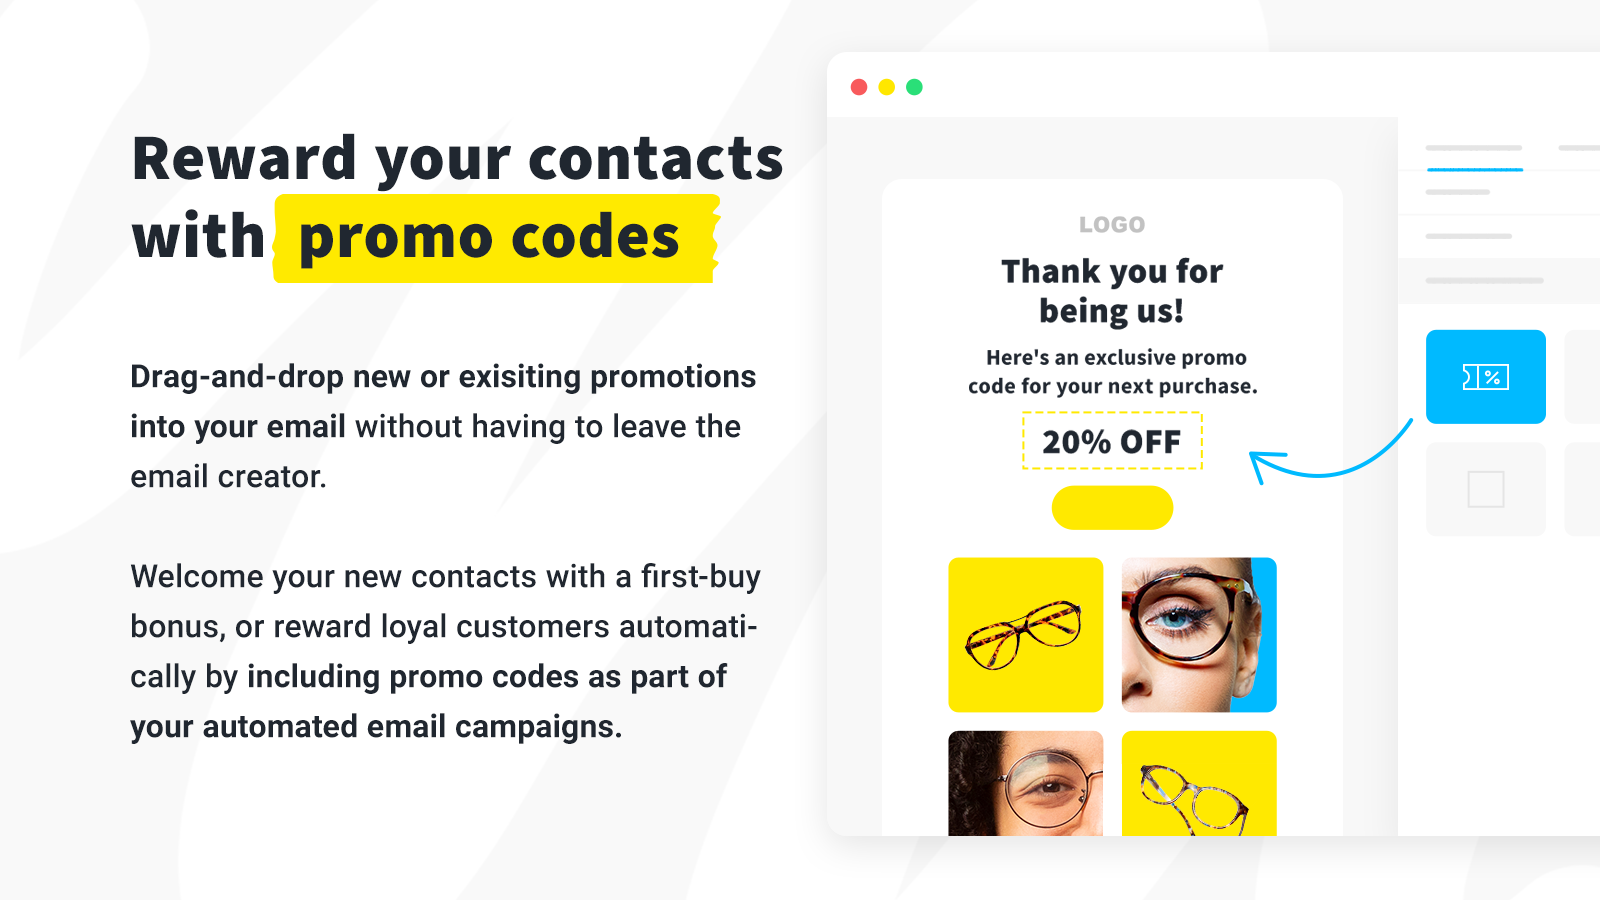 Reward your contacts with promo codes 